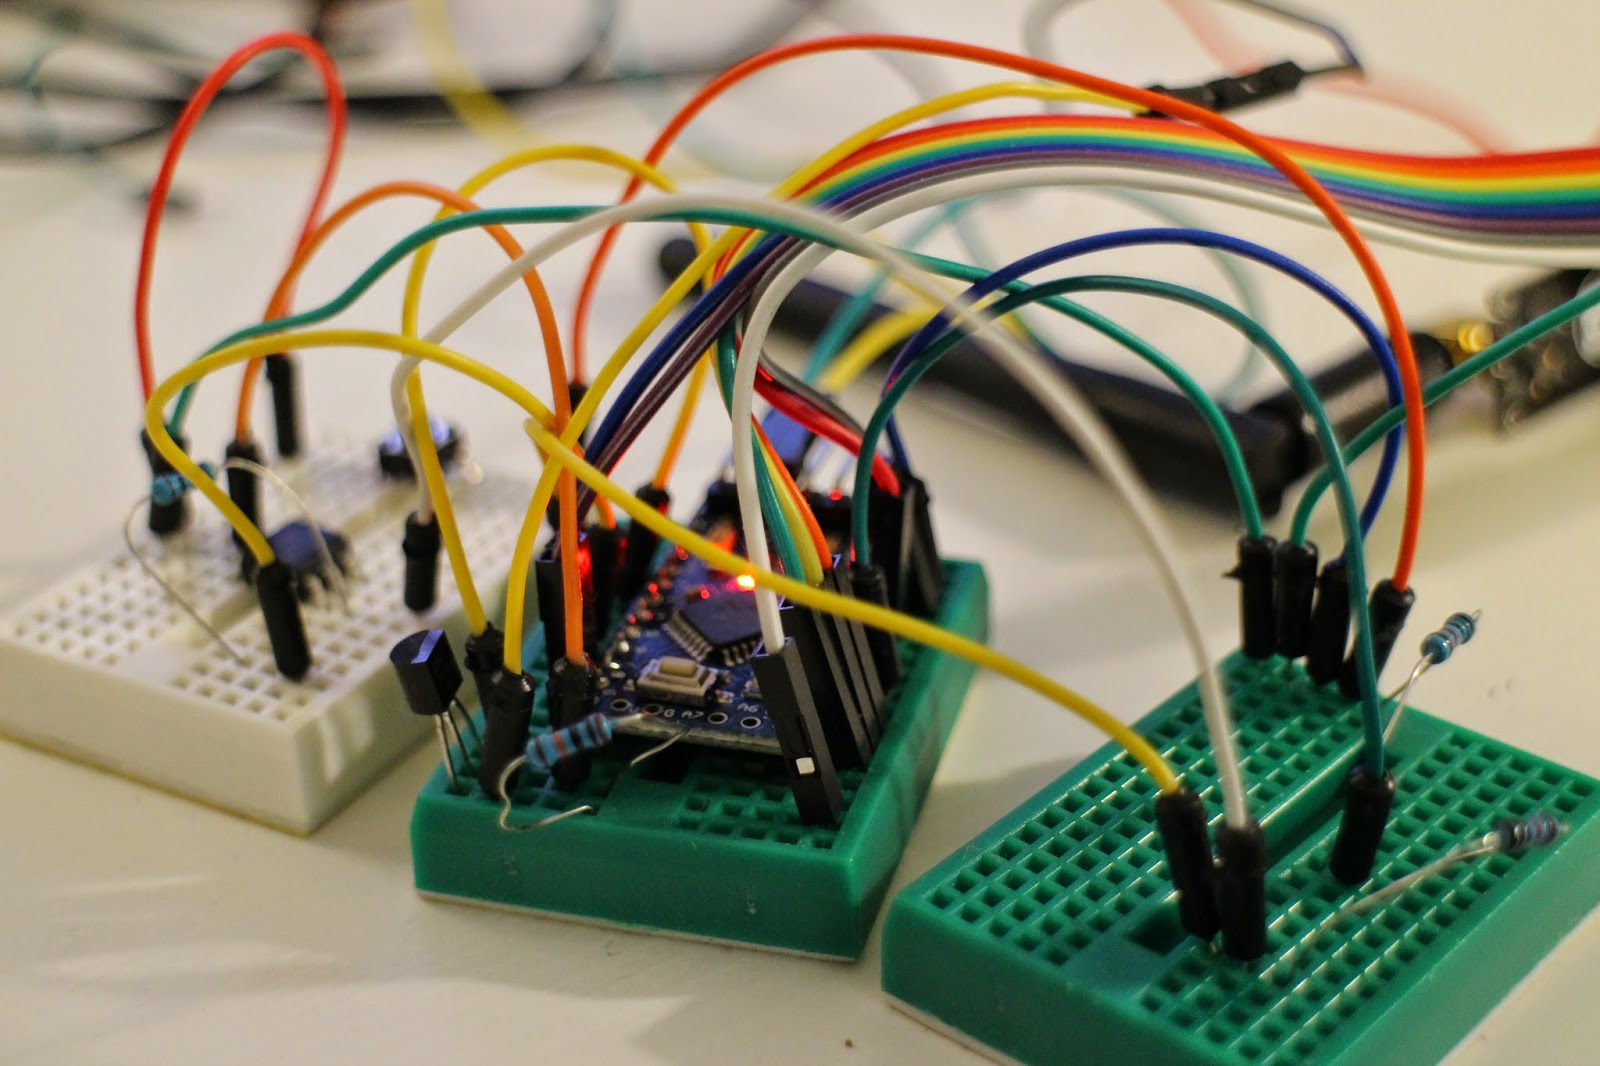 Overview of Arduino Boards - Home Circuits